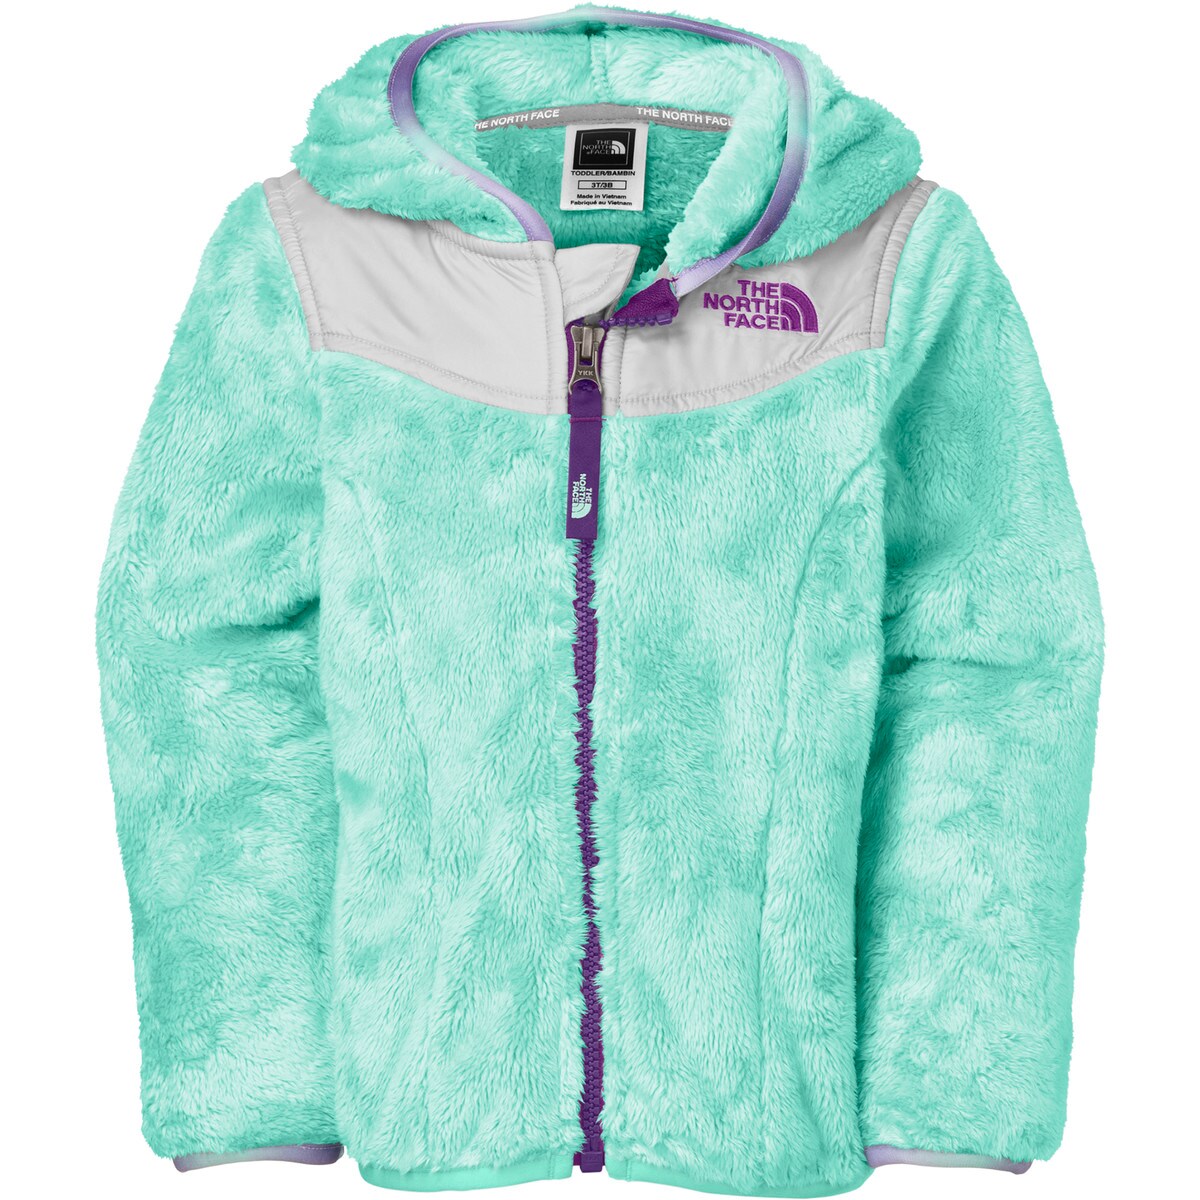 The North Face Oso Hooded Fleece Jacket - Toddler Girls' - Kids